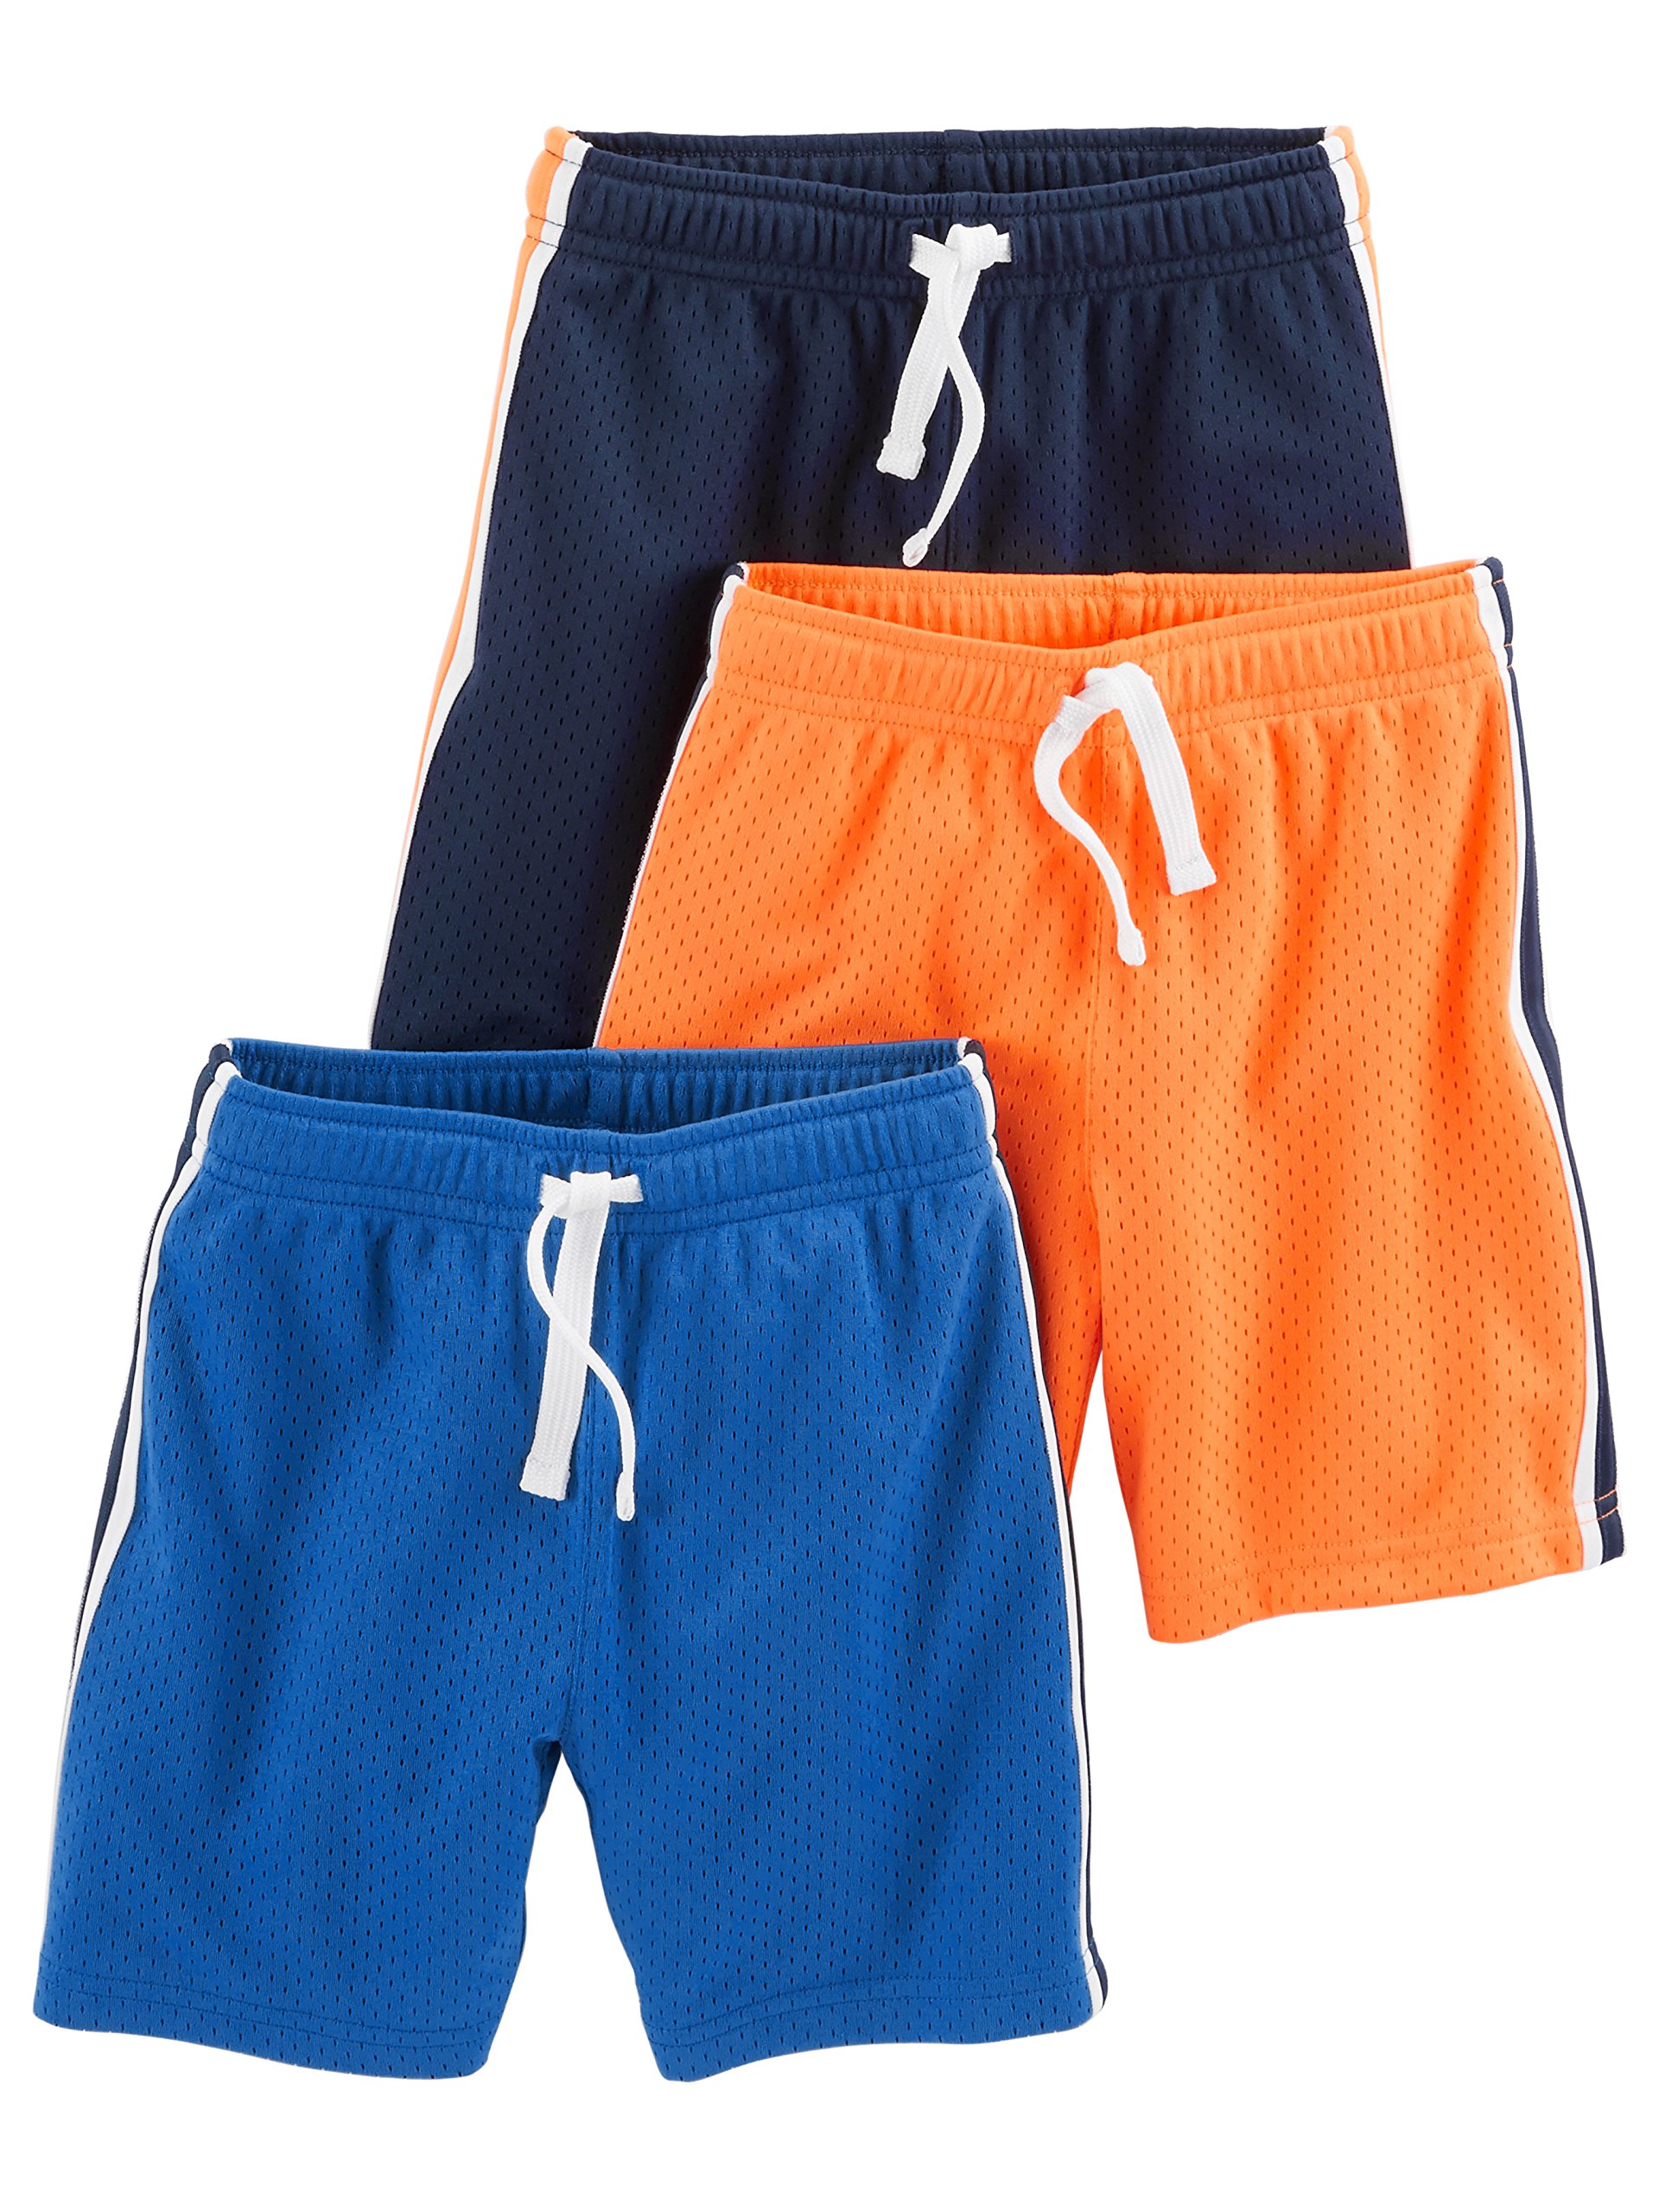 Simple Joys by Carter's Boys and Toddlers' Mesh Shorts, Pack of 3